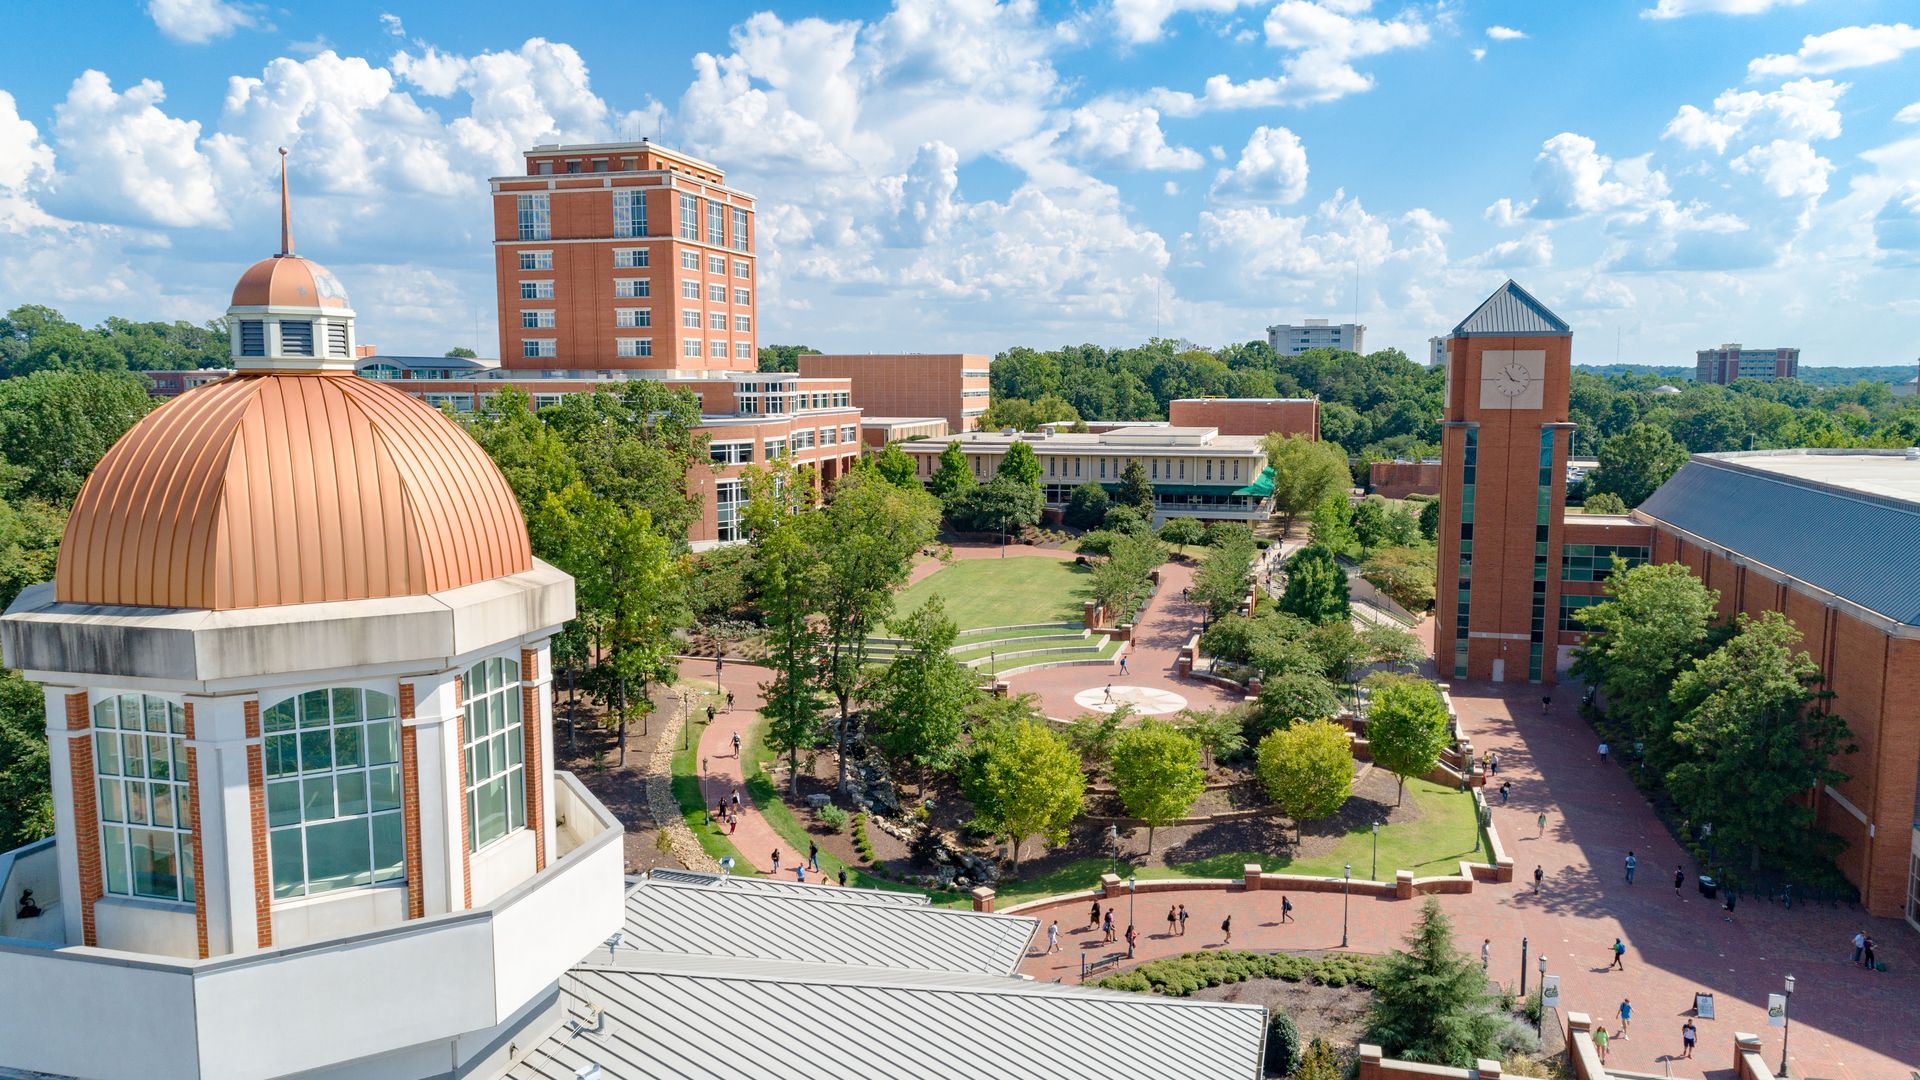 The campus of UNC Charlotte